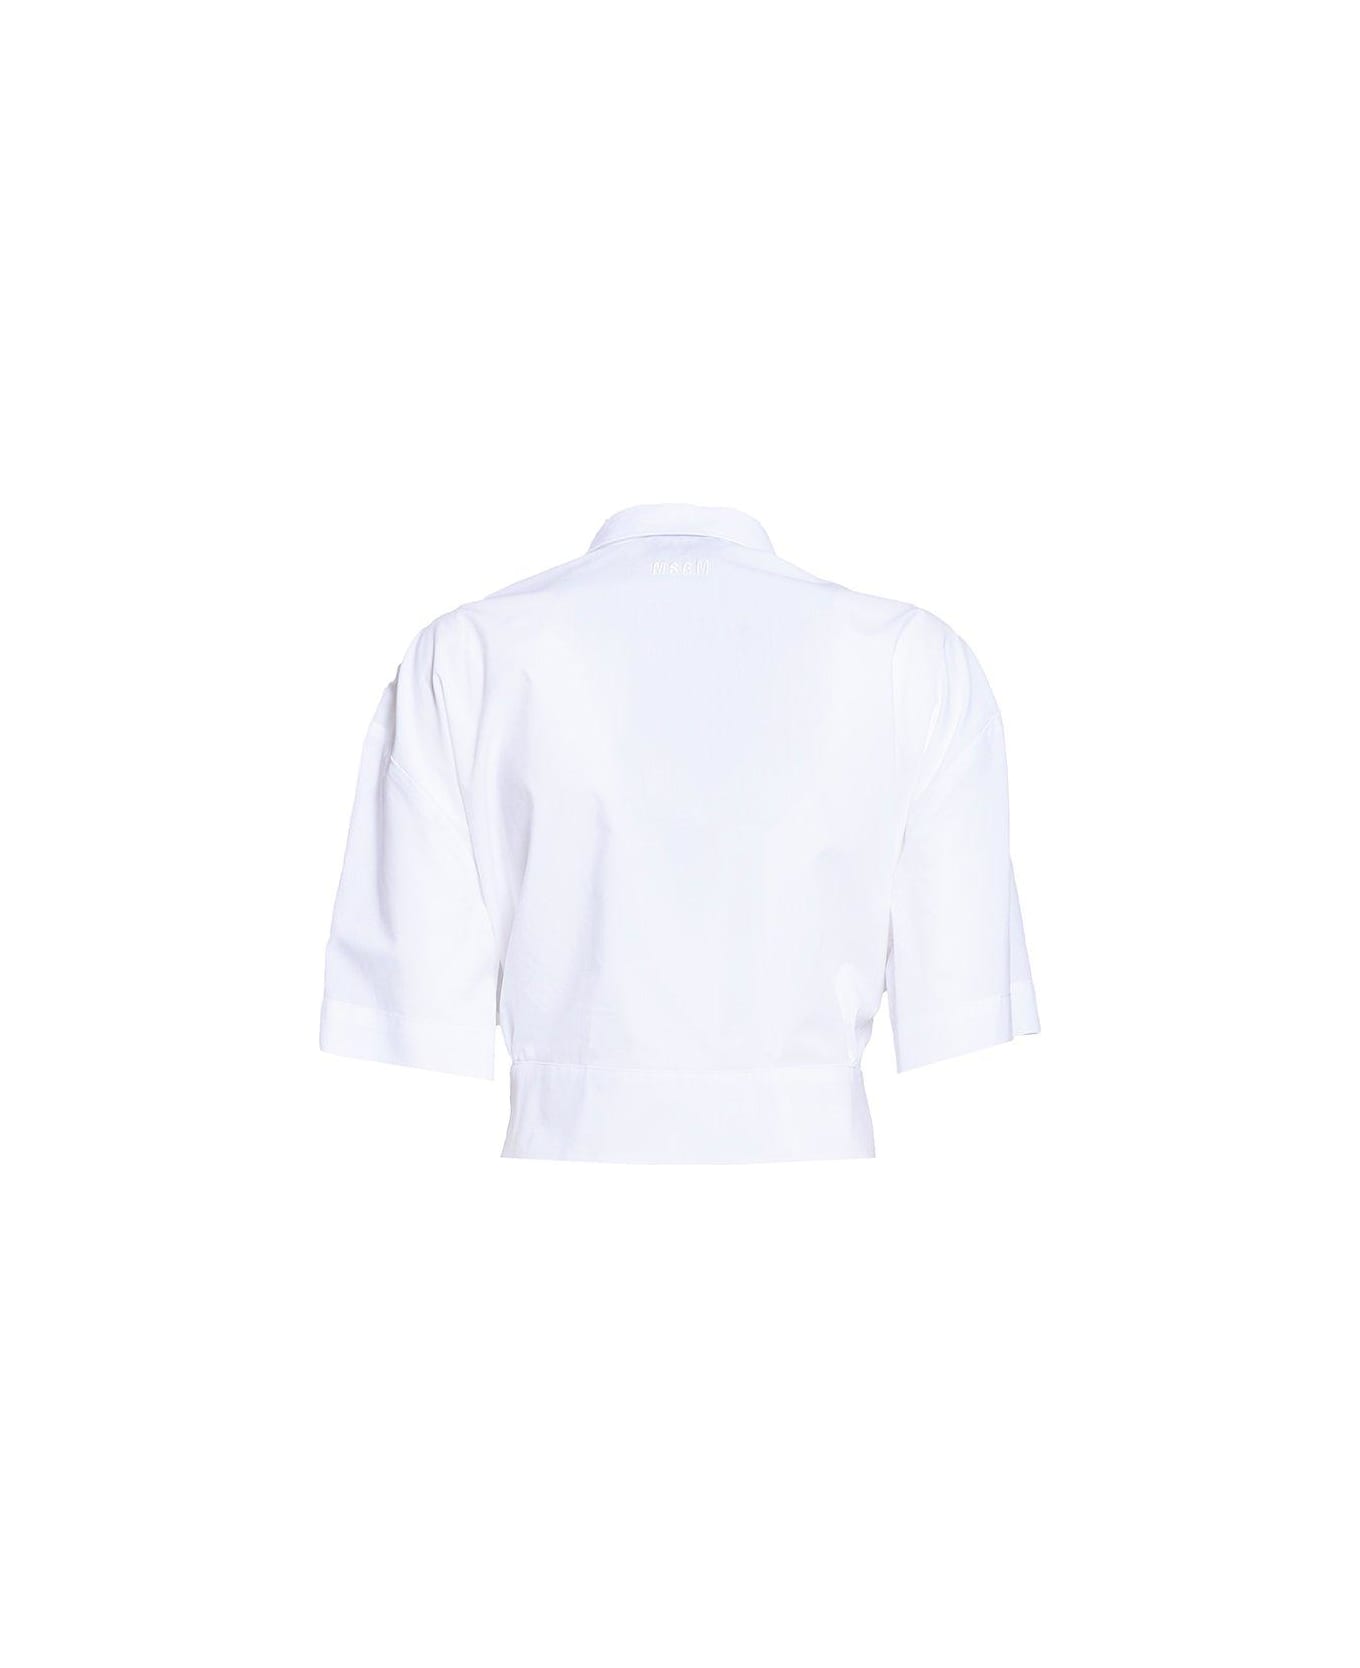 MSGM Pussy Bow Detailed Cropped Shirt - Bianco シャツ